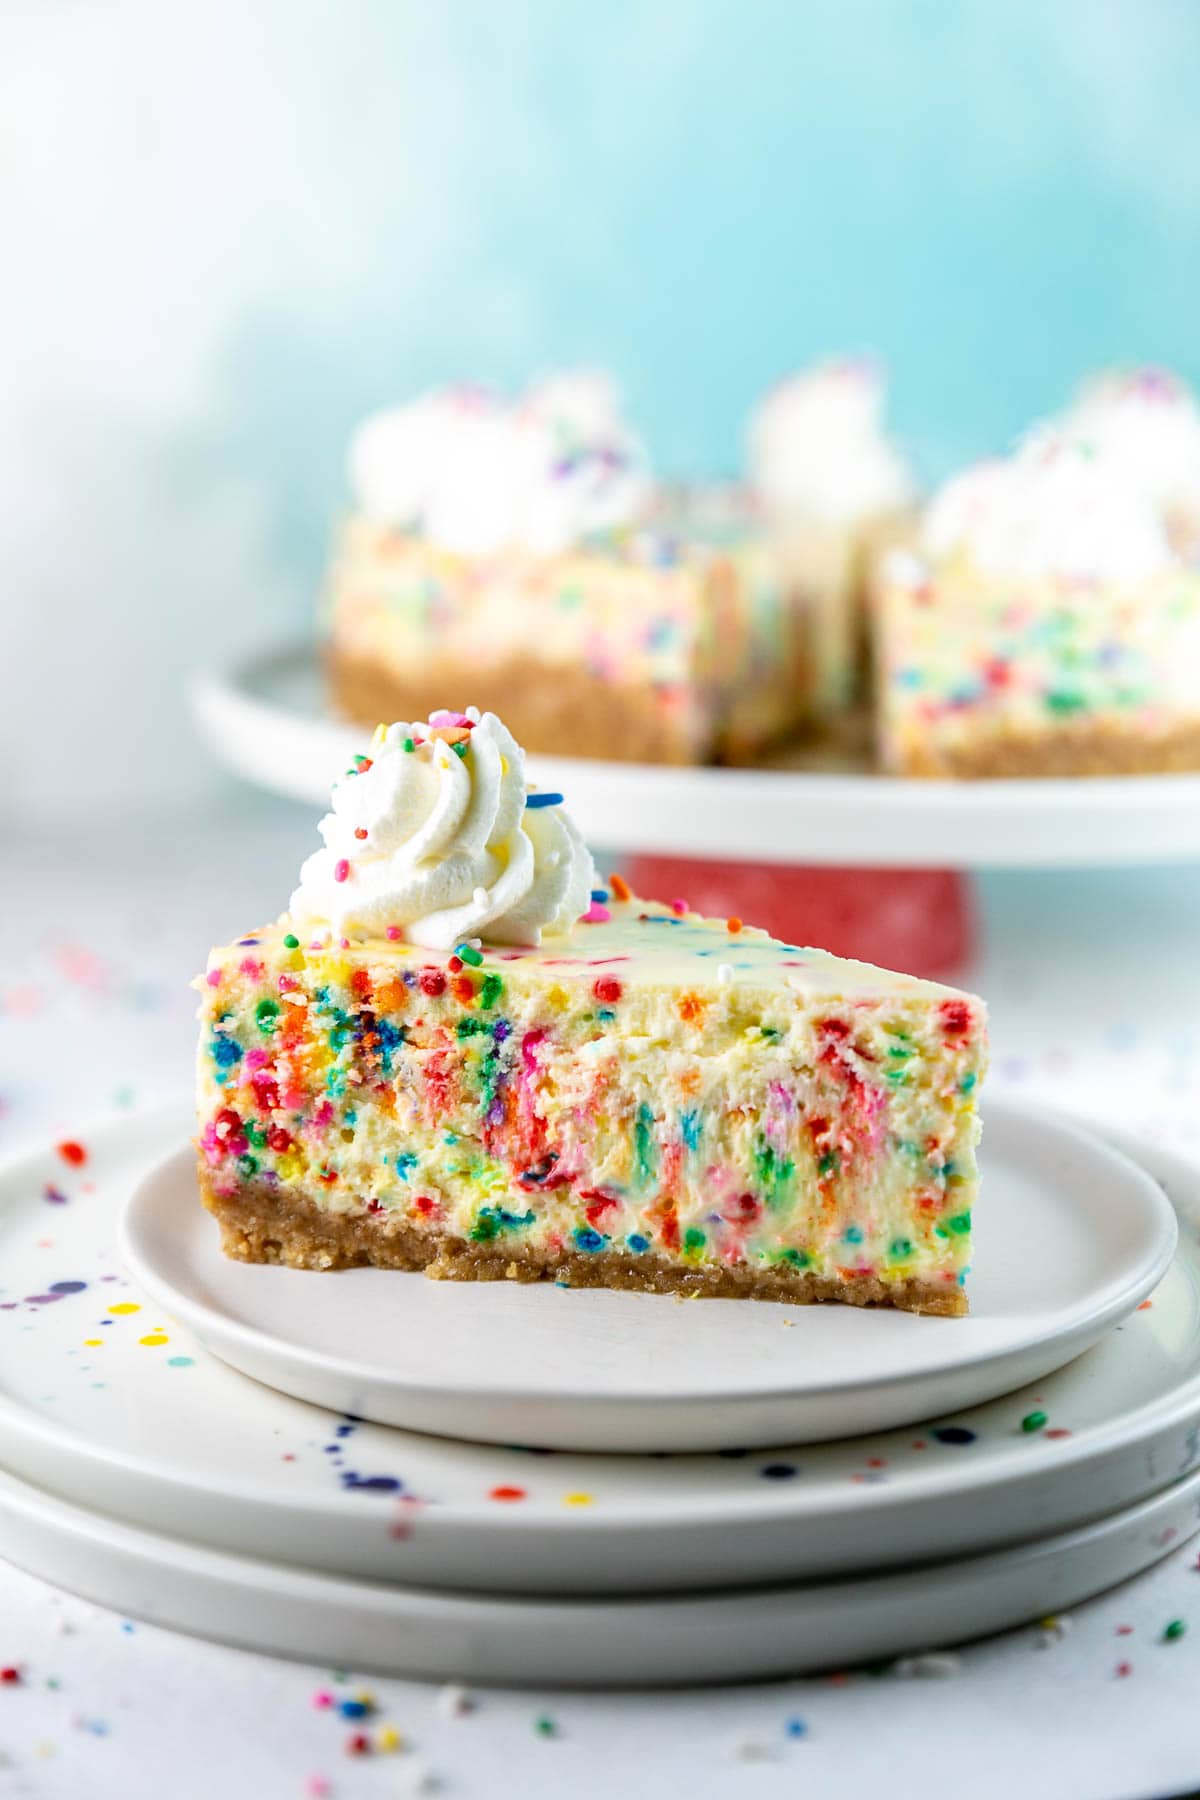 side view of a slice of cheesecake showing off the sprinkle filled interior